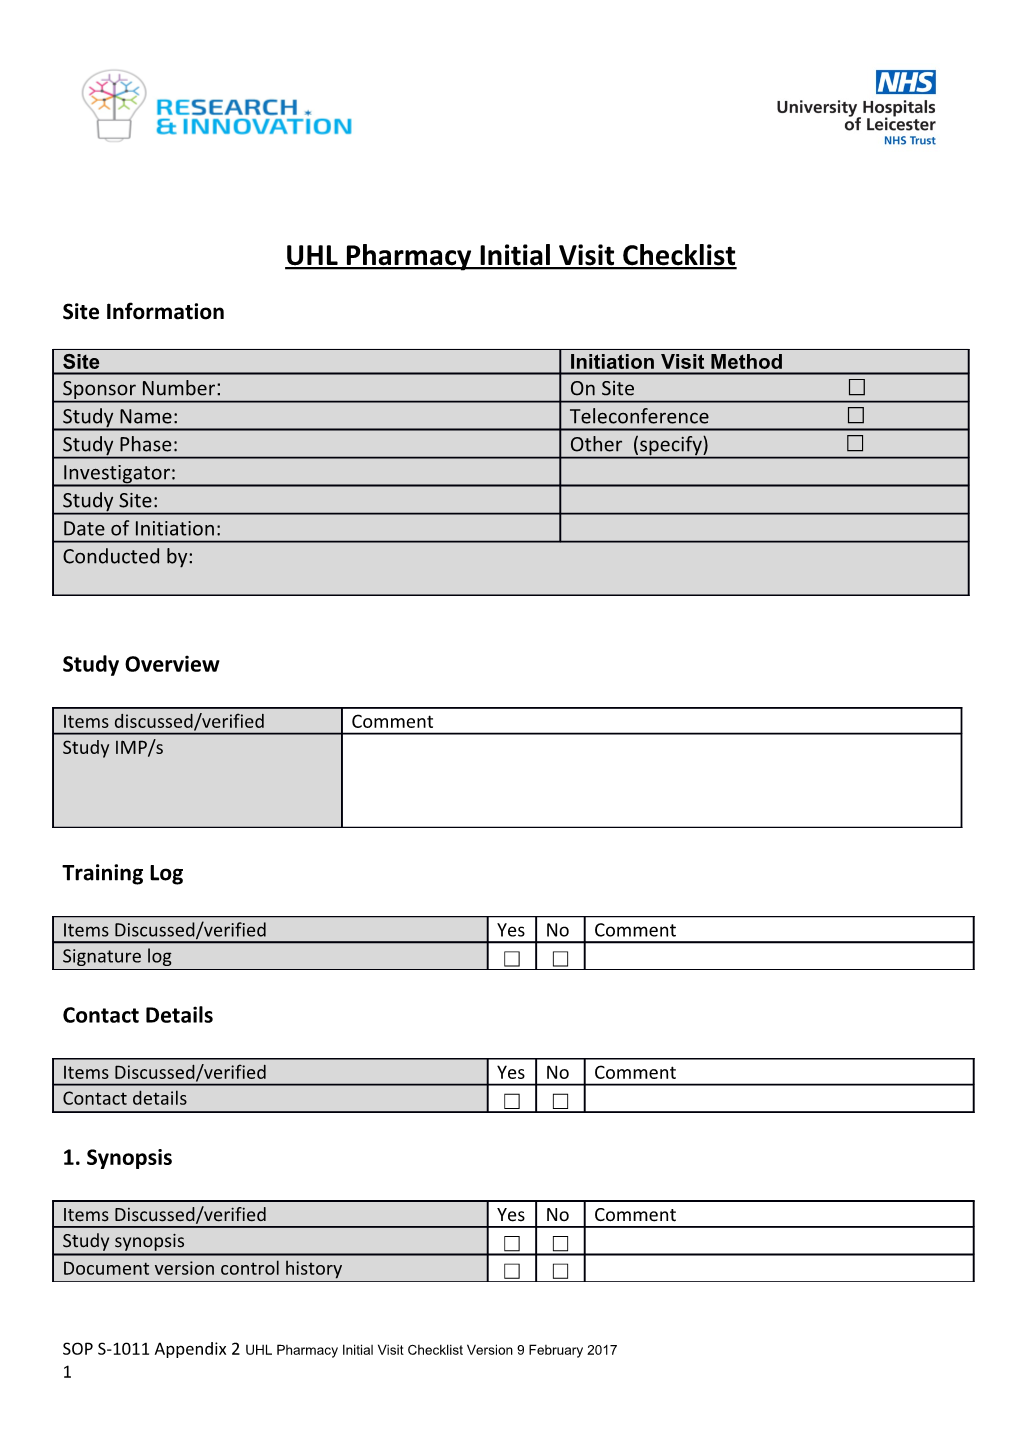 Uhlpharmacy Initial Visit Checklist